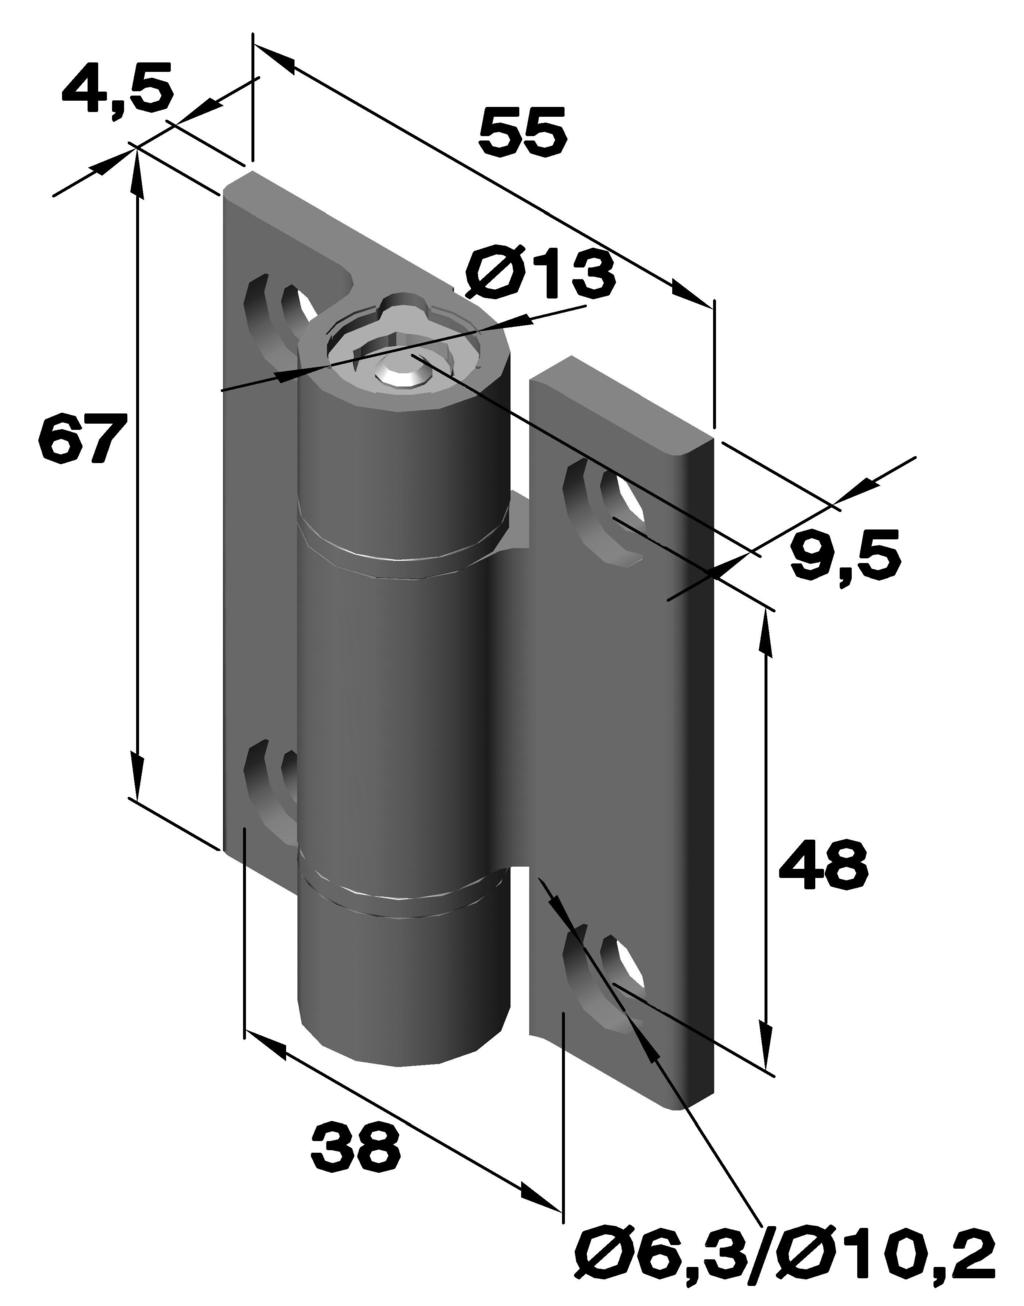 Free running hinge see chapter Hinges Spring hinge see chapter Spring hinges hinge see chapter